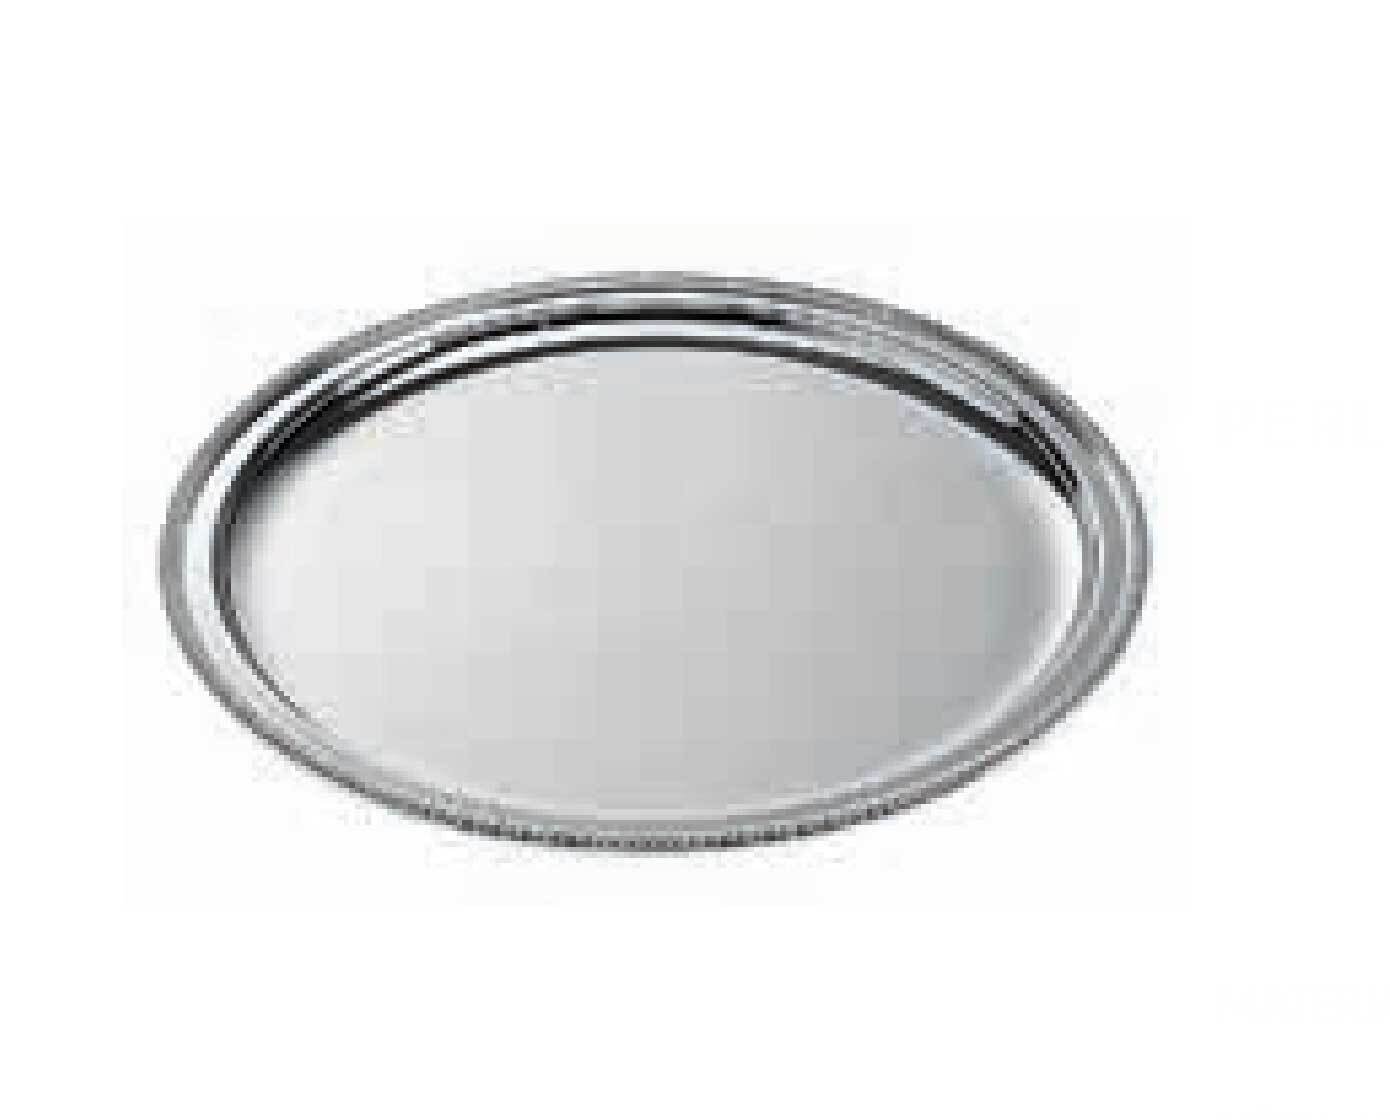 Ercuis Perles Round Tray 16.125 Inch Silver Plated F51P460-41